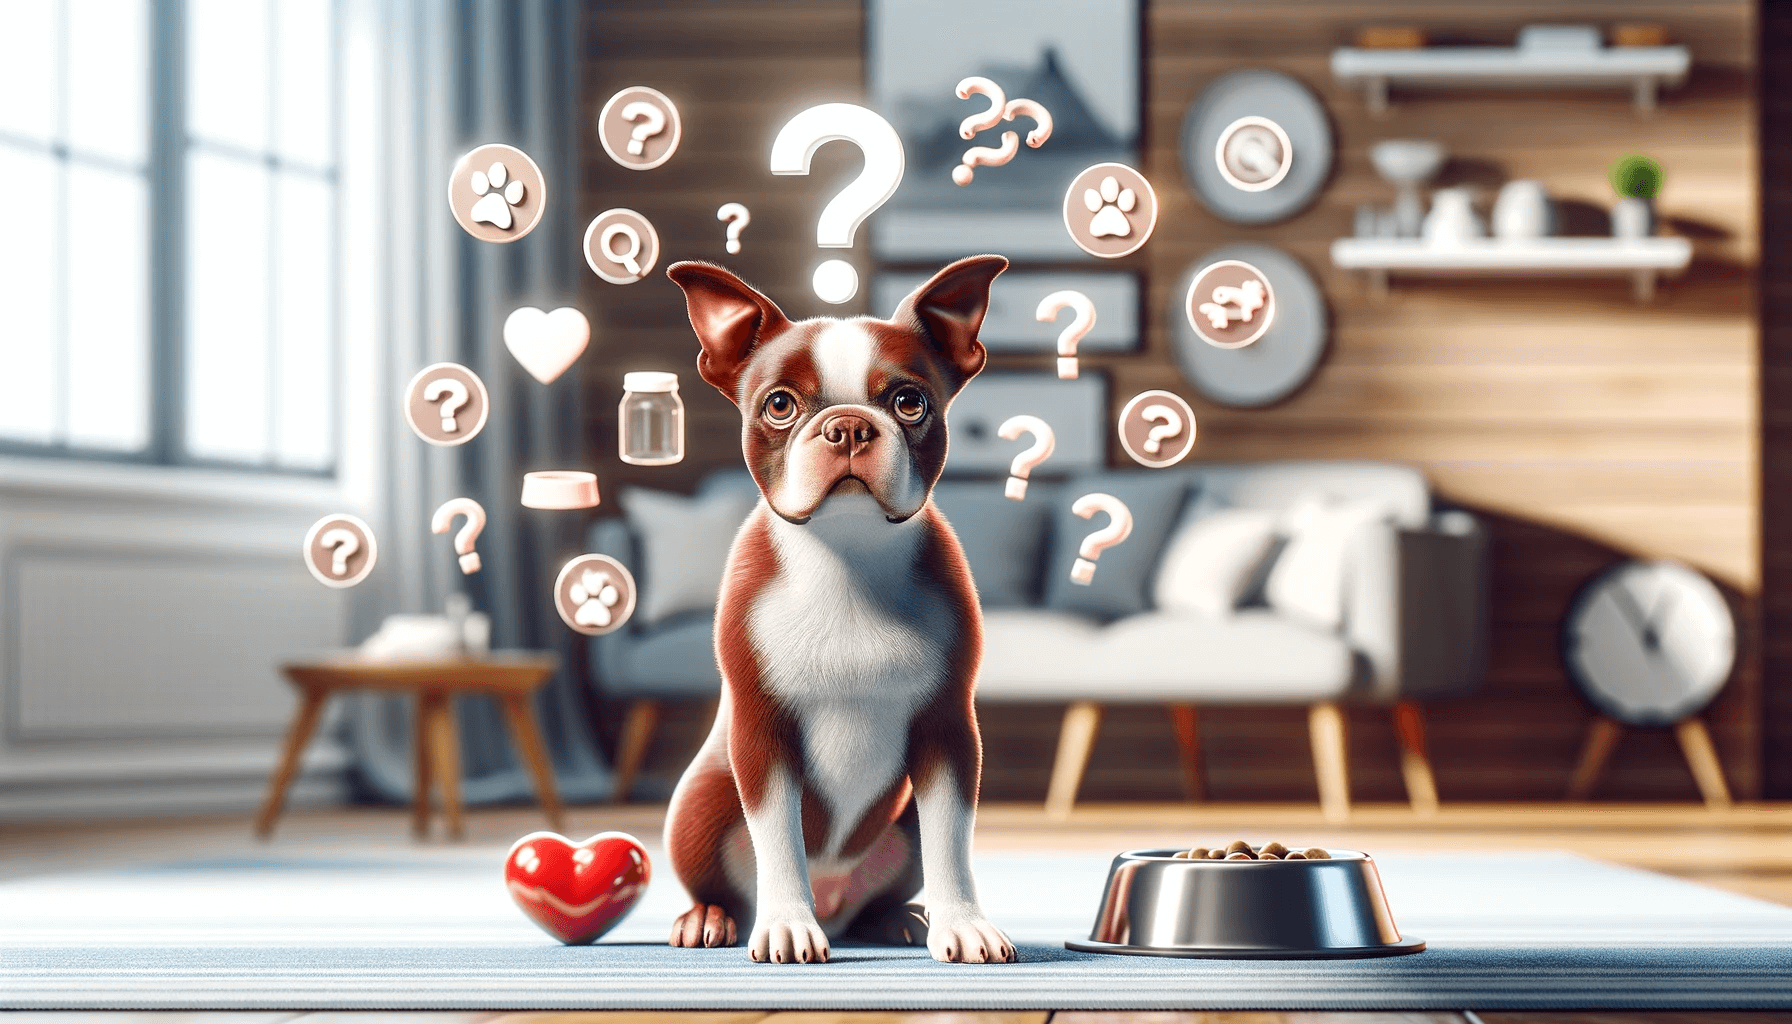 Red Boston Terrier with a Question Mark Above Its Head